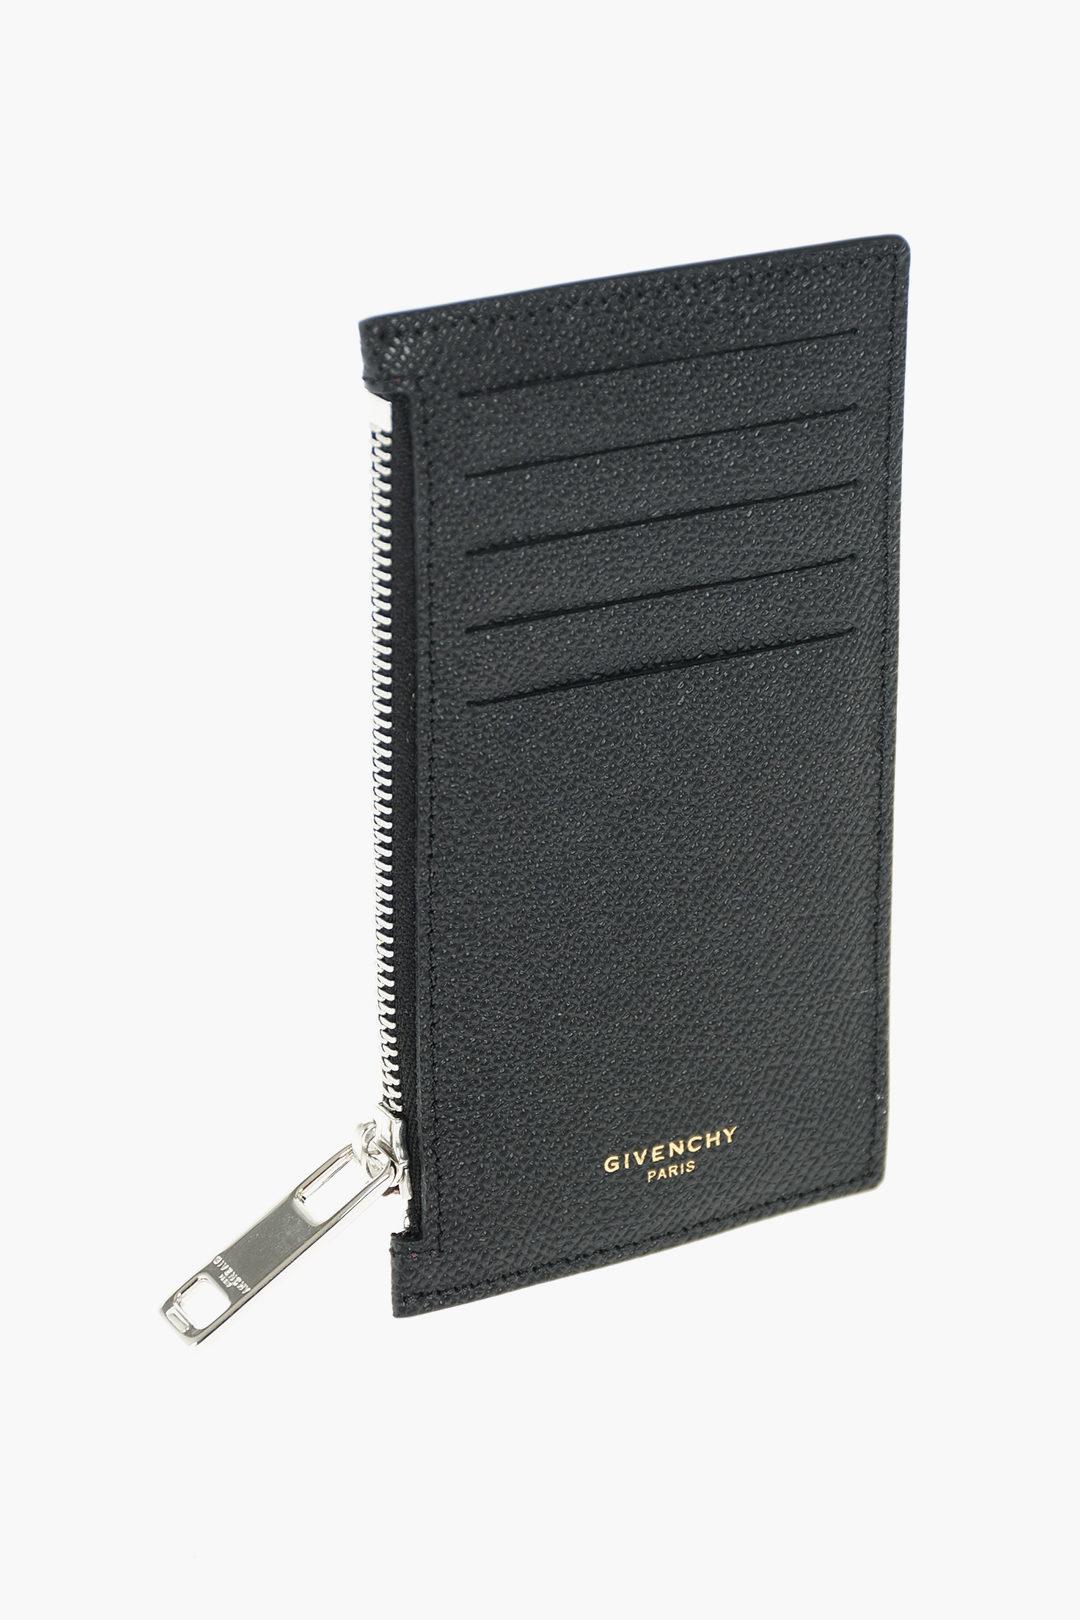 Givenchy textured leather card holder with zip closure men - Glamood Outlet